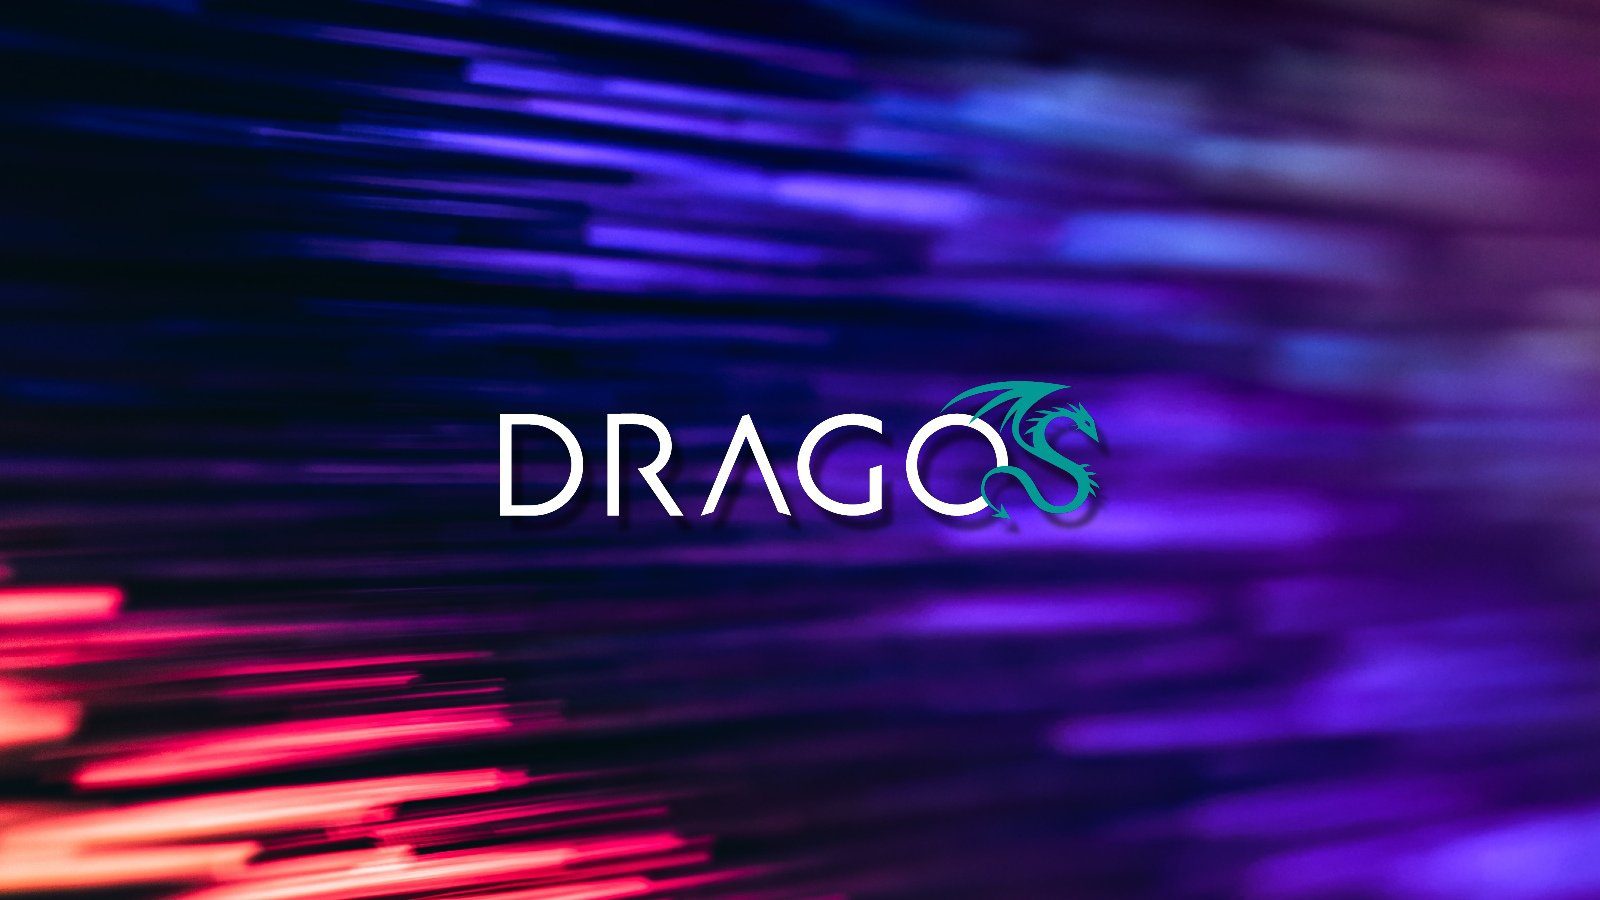 Cybersecurity firm Dragos discloses cybersecurity incident, extortion attempt – Source: www.bleepingcomputer.com